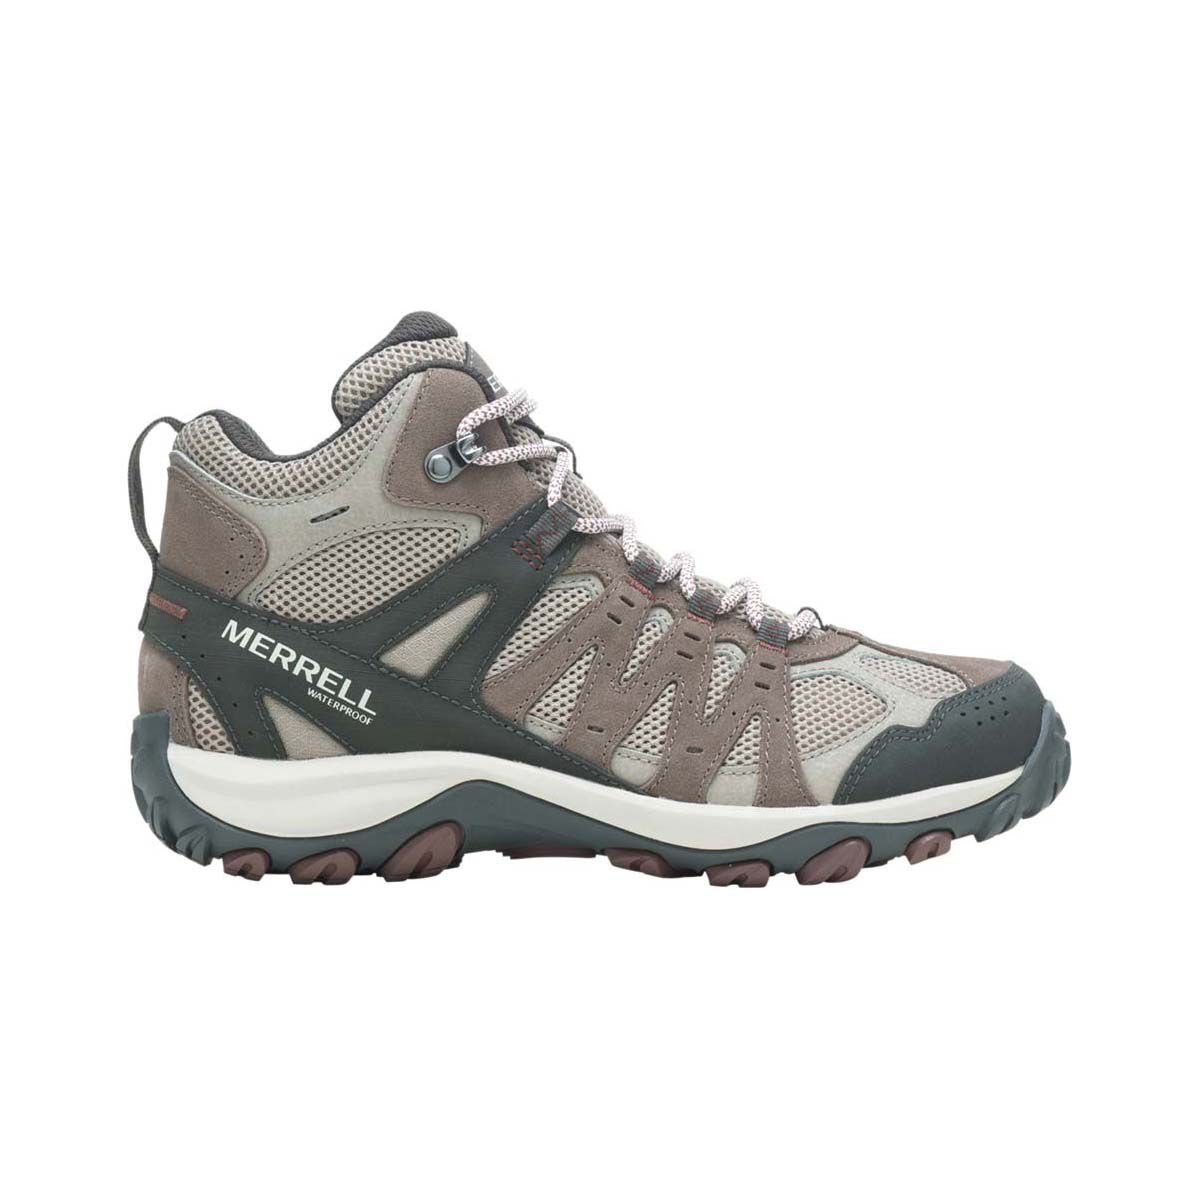 Merrell Accentor 3 Women's Mid WP Hiking Boots | BCF